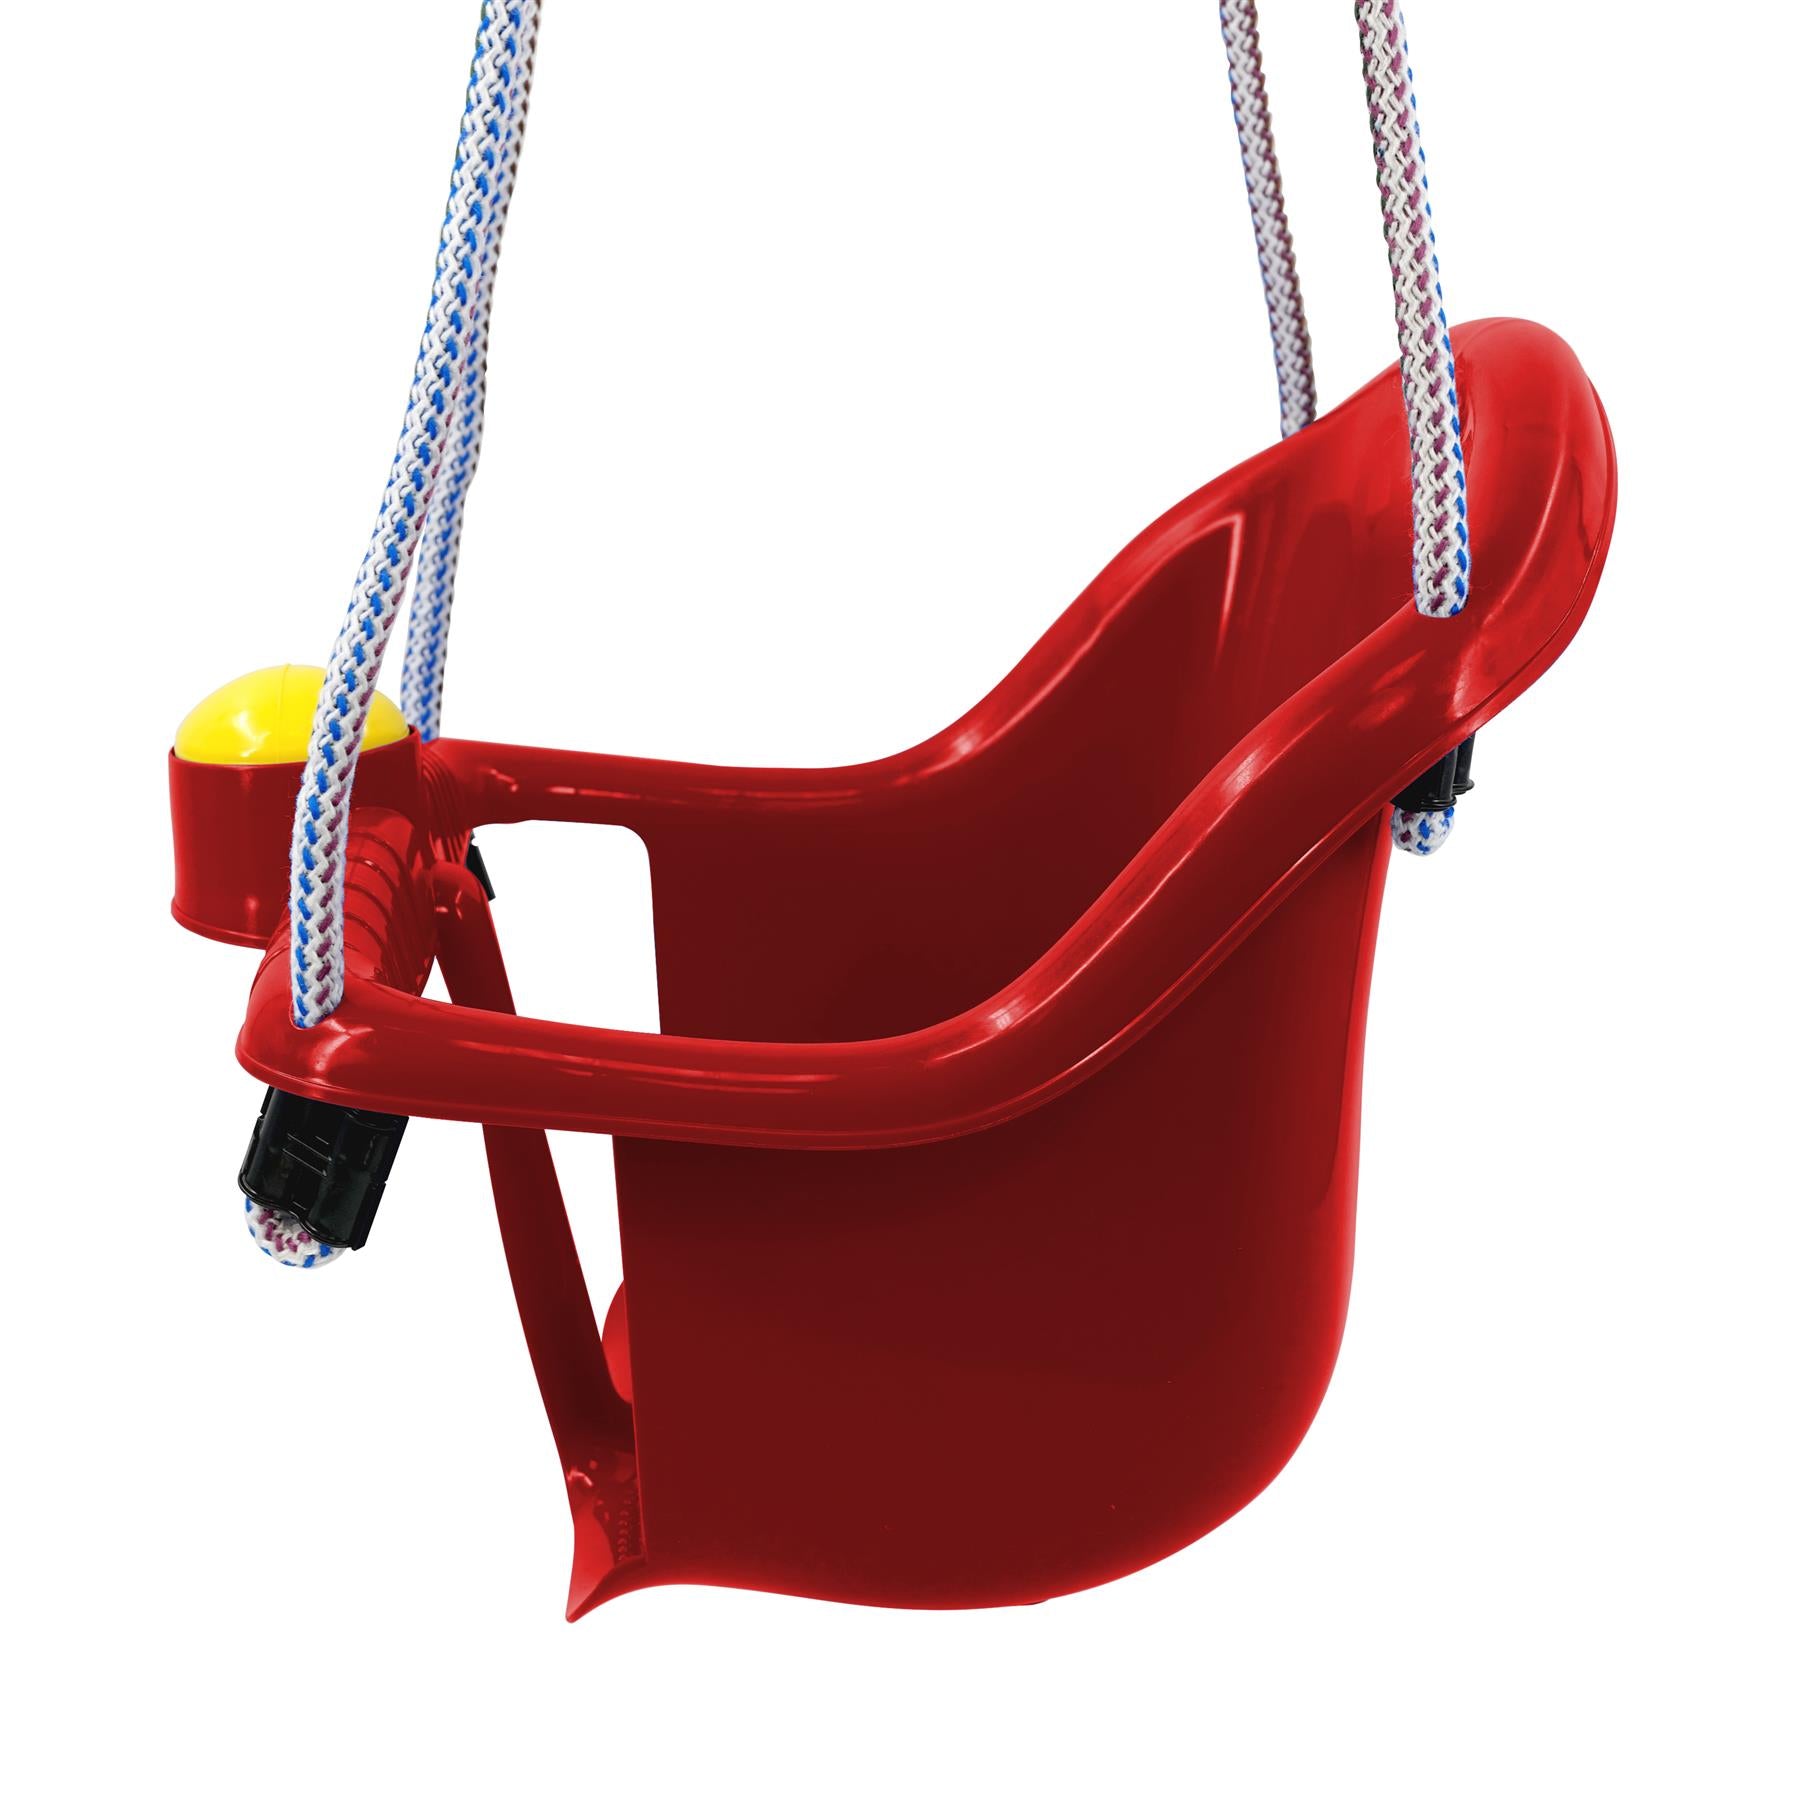 Red Children's Safety Swing Seat by MTS - The Magic Toy Shop